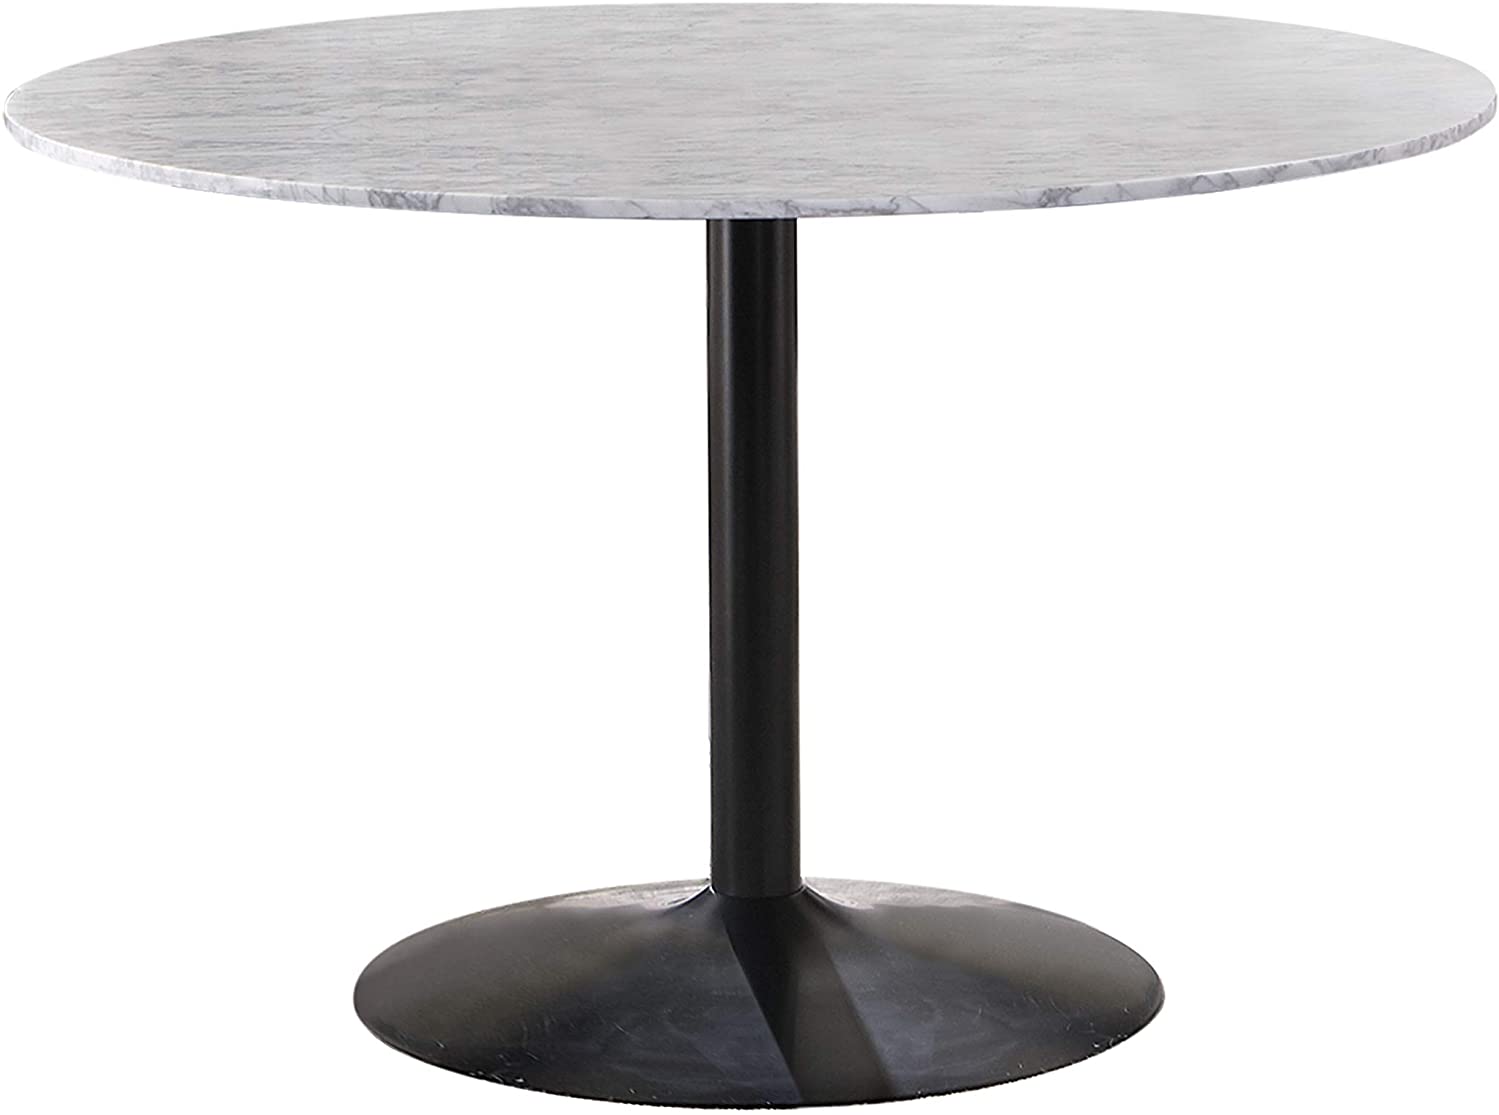 B08G3SMKD8 Coaster Home Furnishings Bartole Round White and Matte Black Dining Table